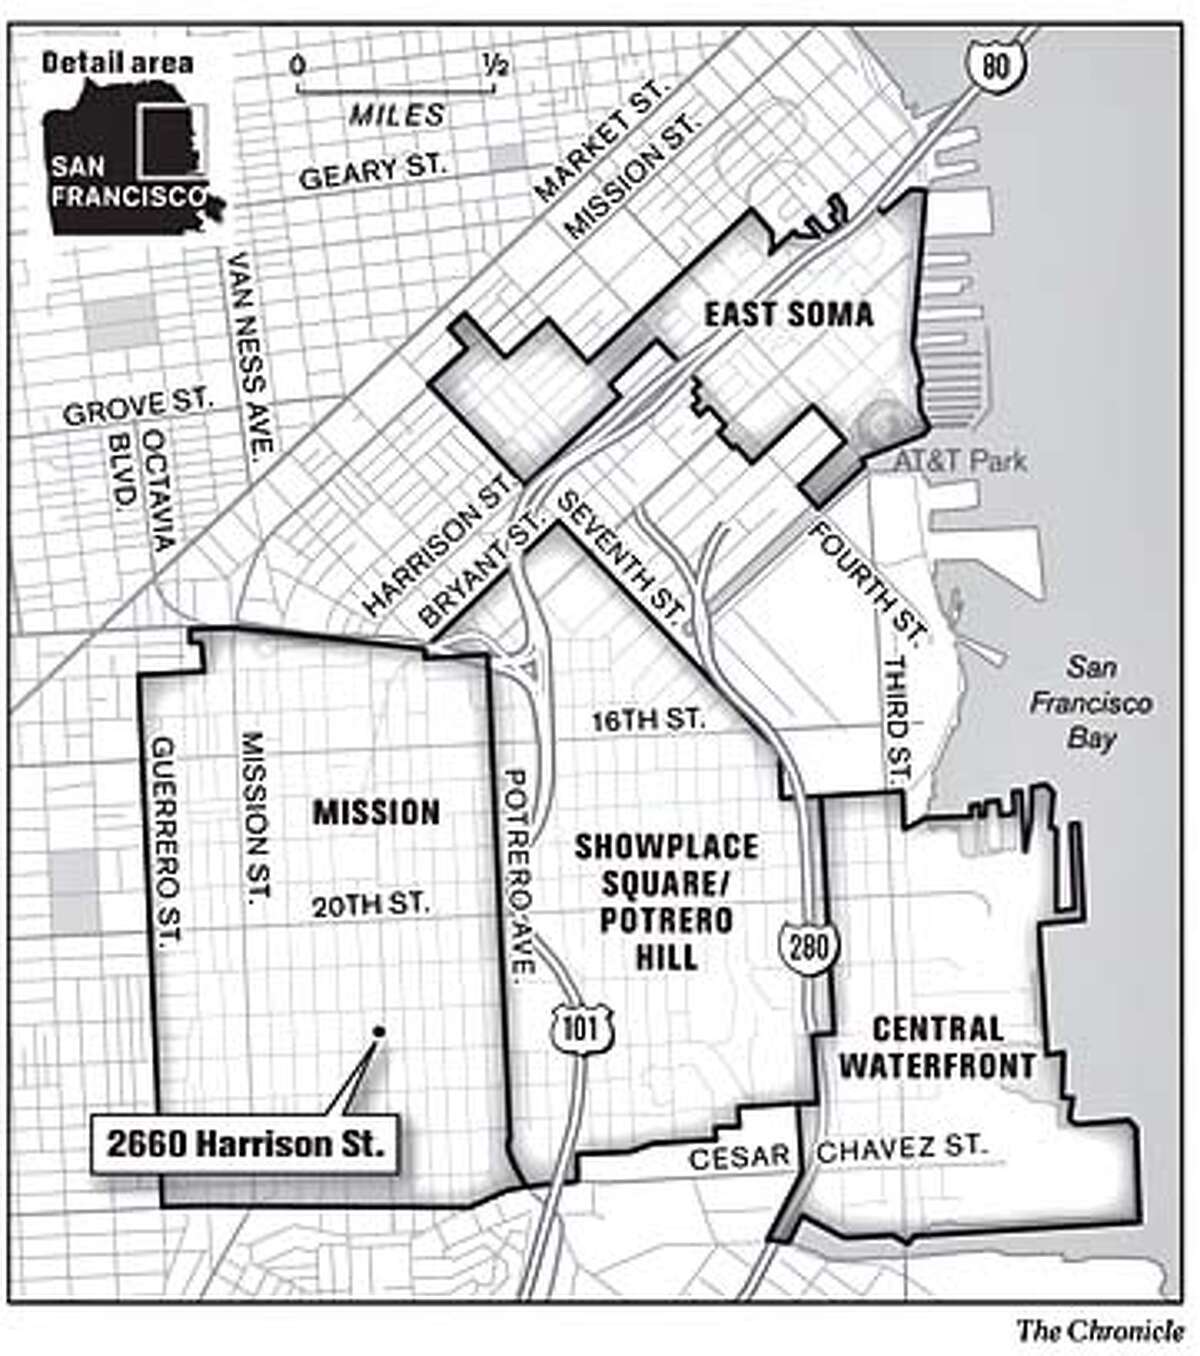 San Francisco's east side. Chronicle Graphic